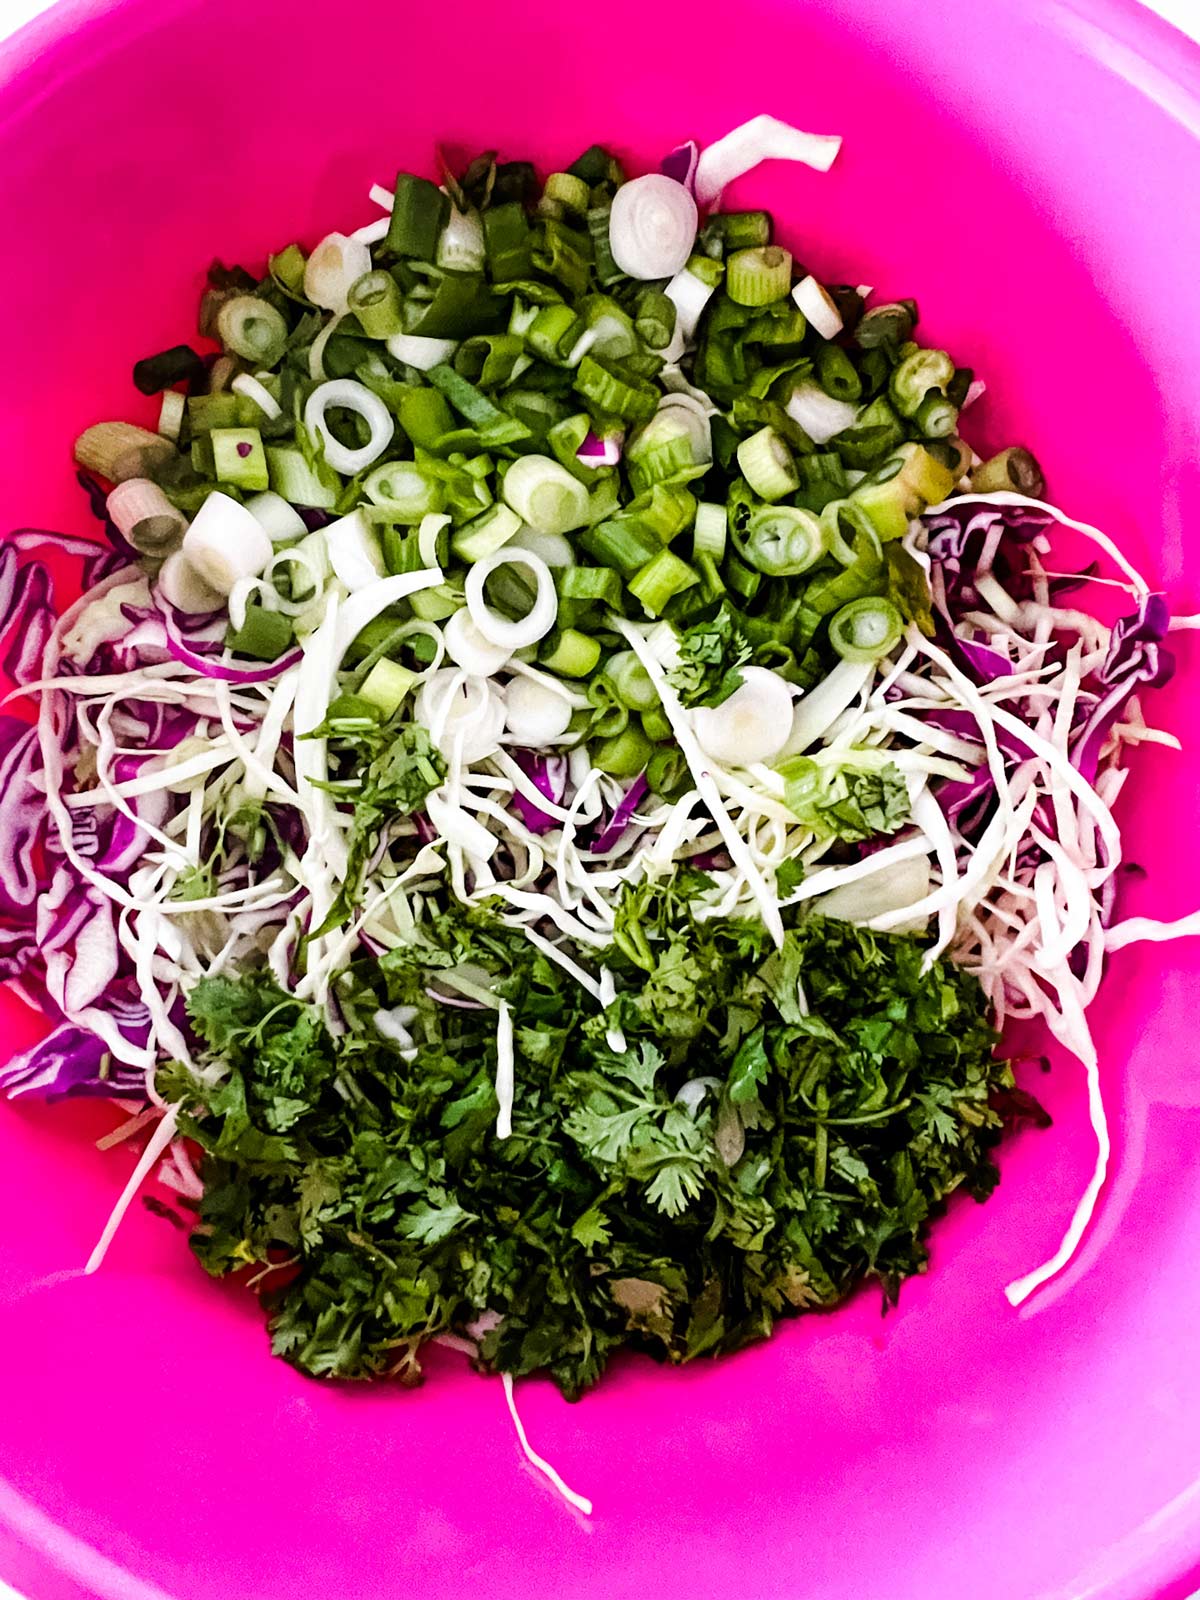 Shredded cabbage, cilantro and green onion in a large bowl.